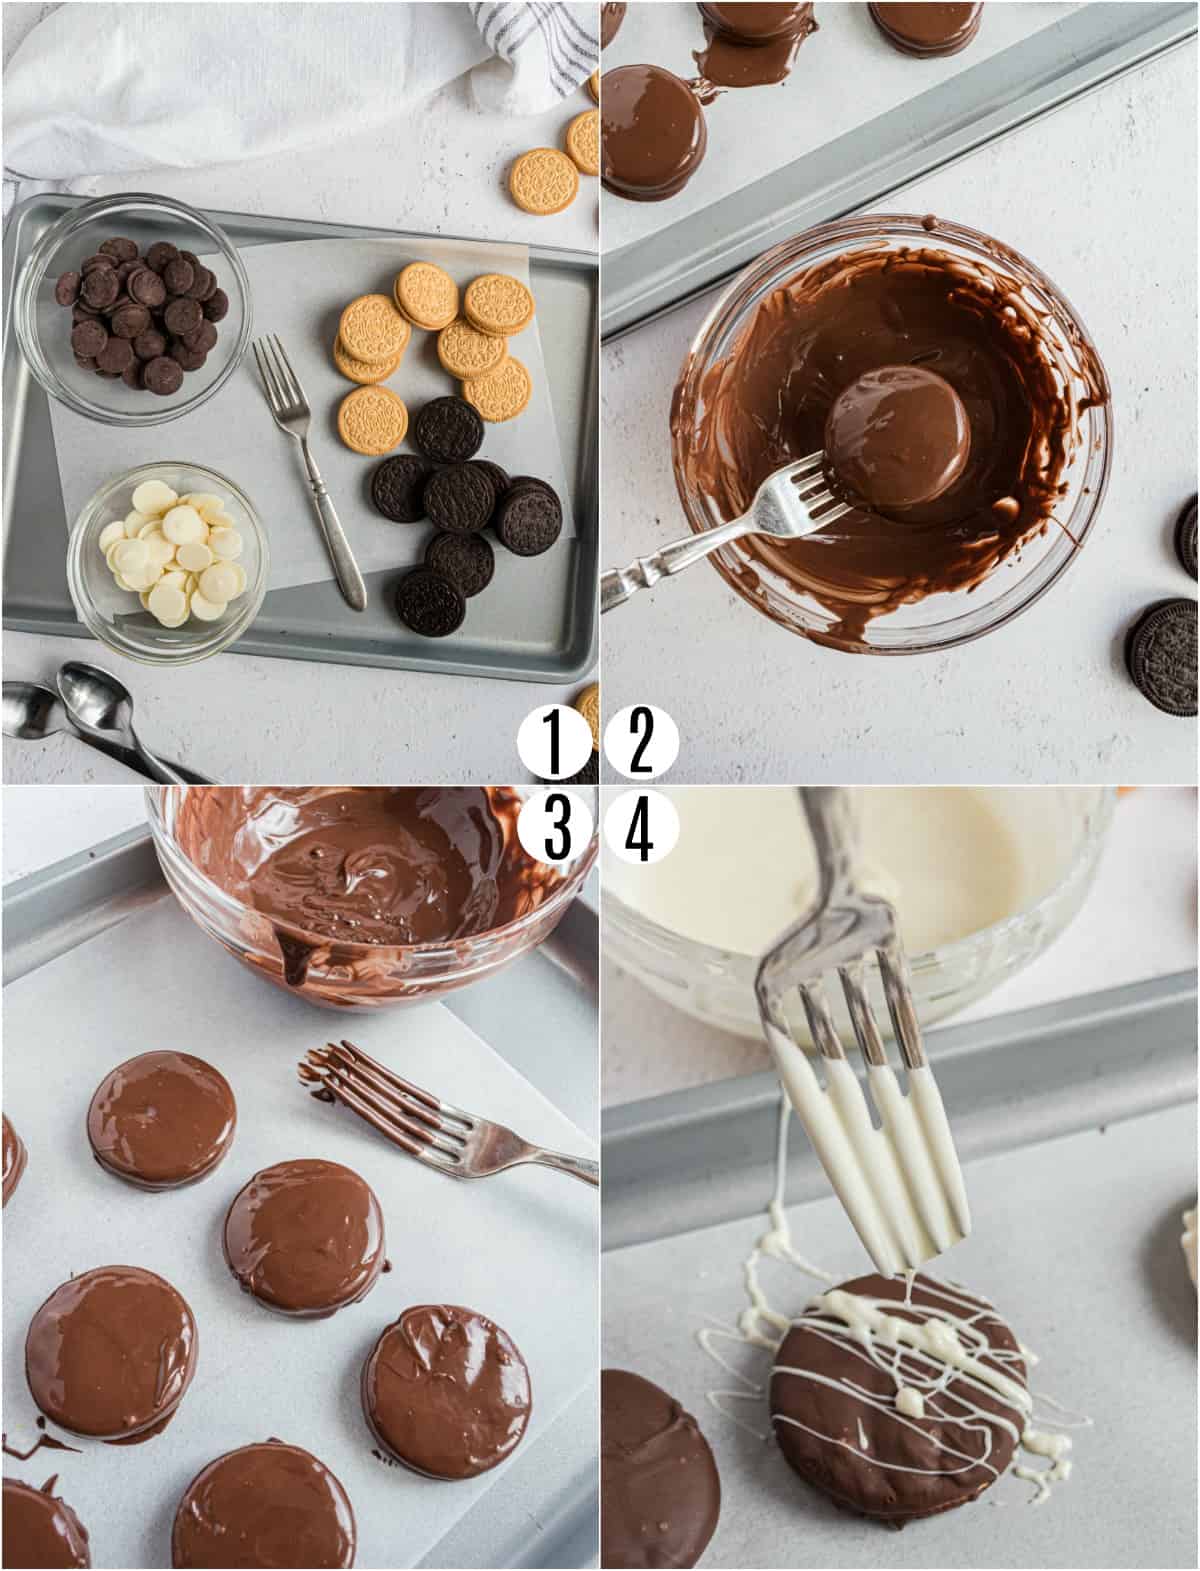 Step by step photos showing how to make chocolate covered oreos.